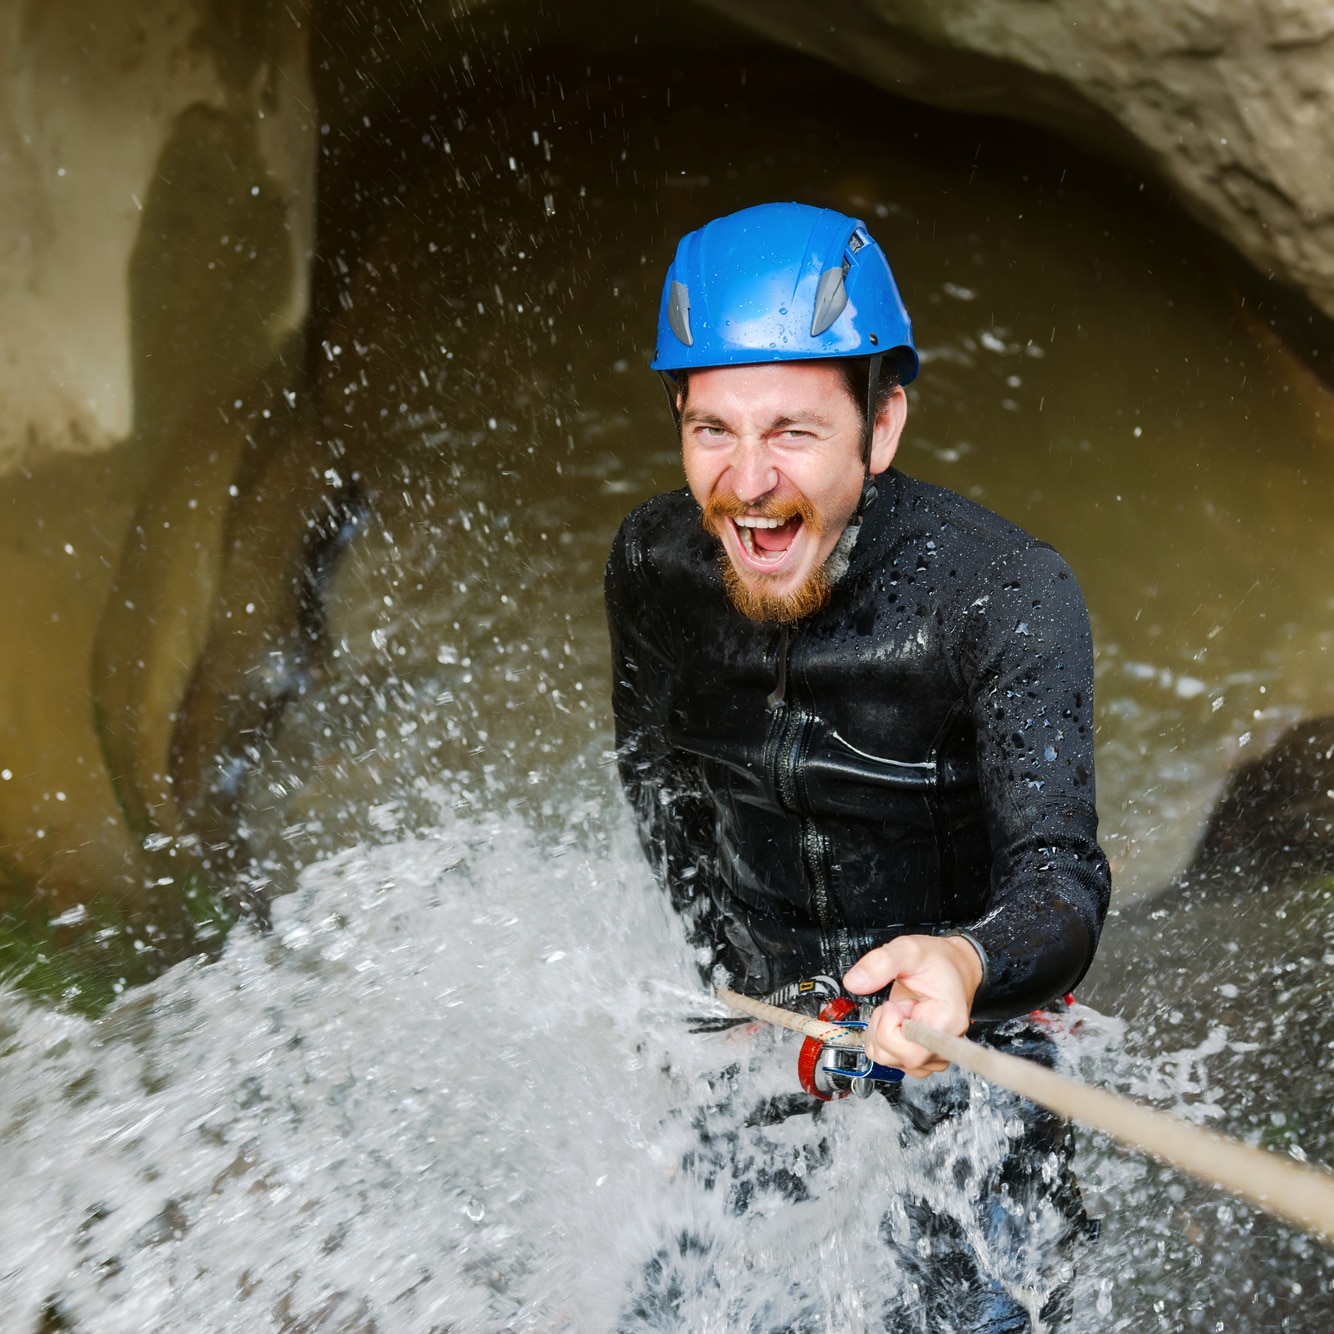 Getting wet while canyoning